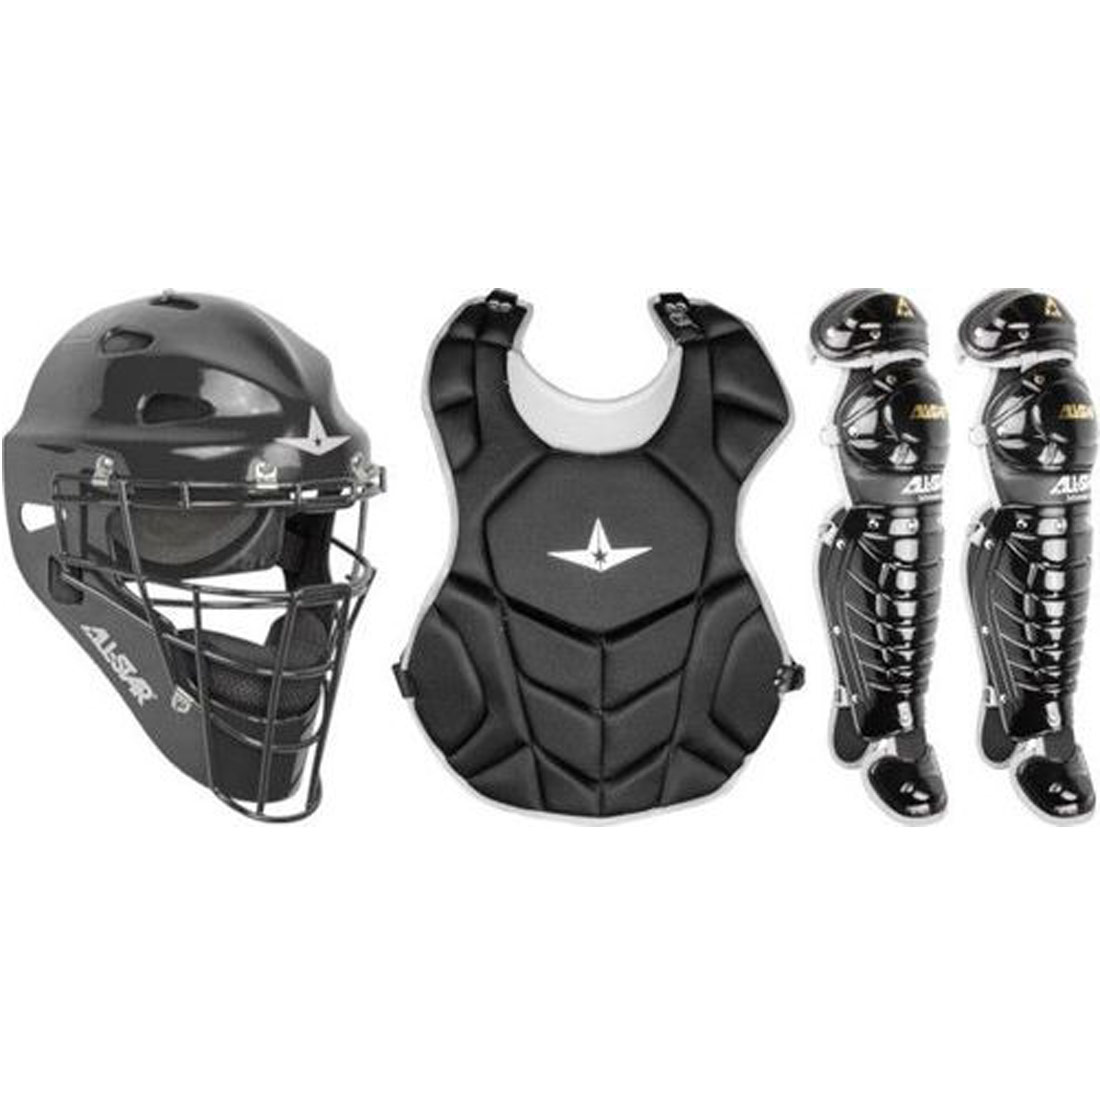 All Star Youth Player's Series Catcher's Set (7-9) Black